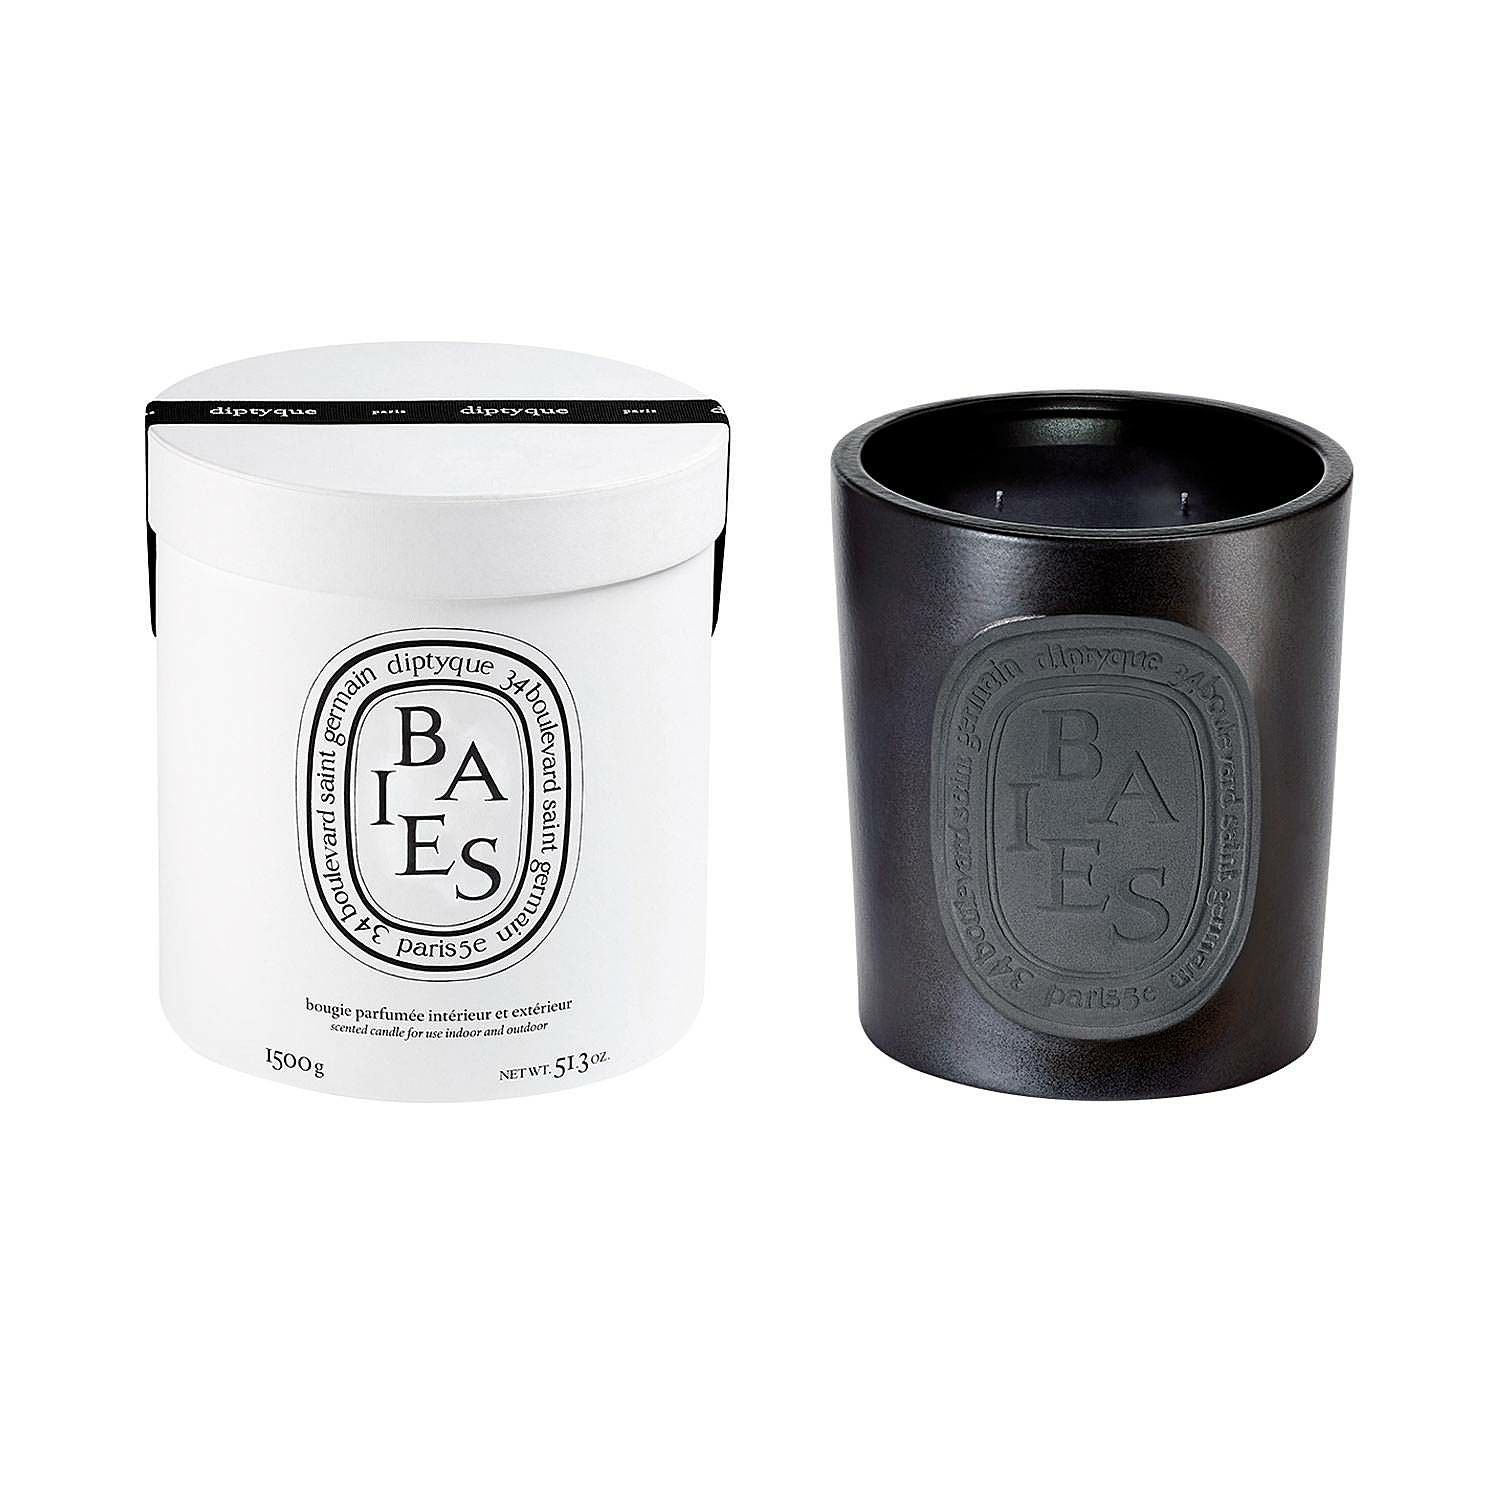 DIPTYQUE BAIES SCENTED CANDLE 1500G - Misc - 1500G